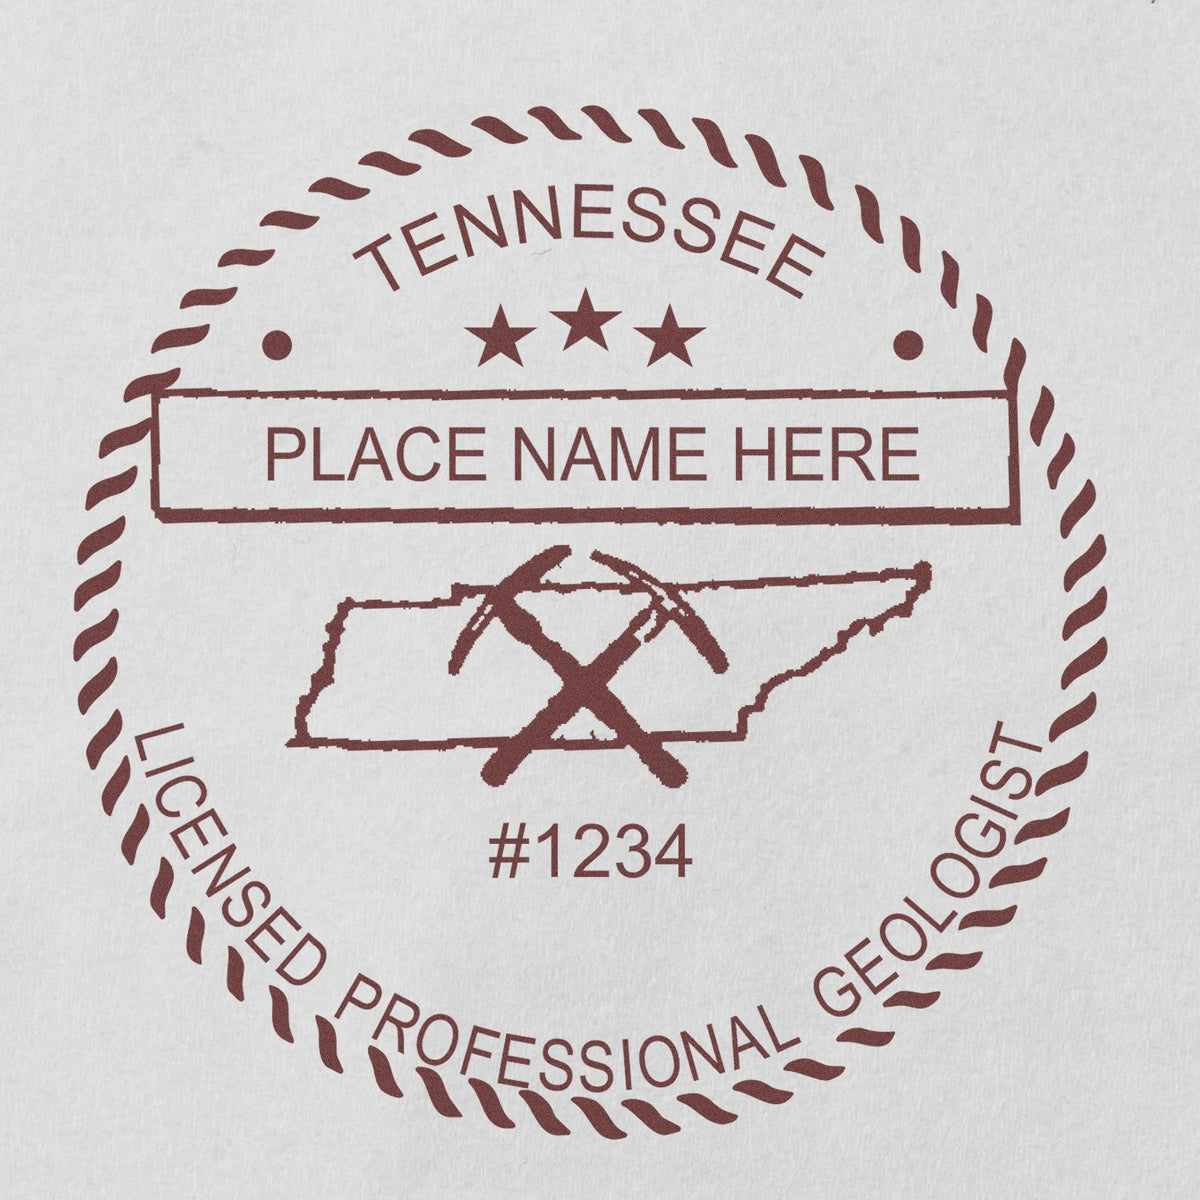 Another Example of a stamped impression of the Tennessee Professional Geologist Seal Stamp on a office form